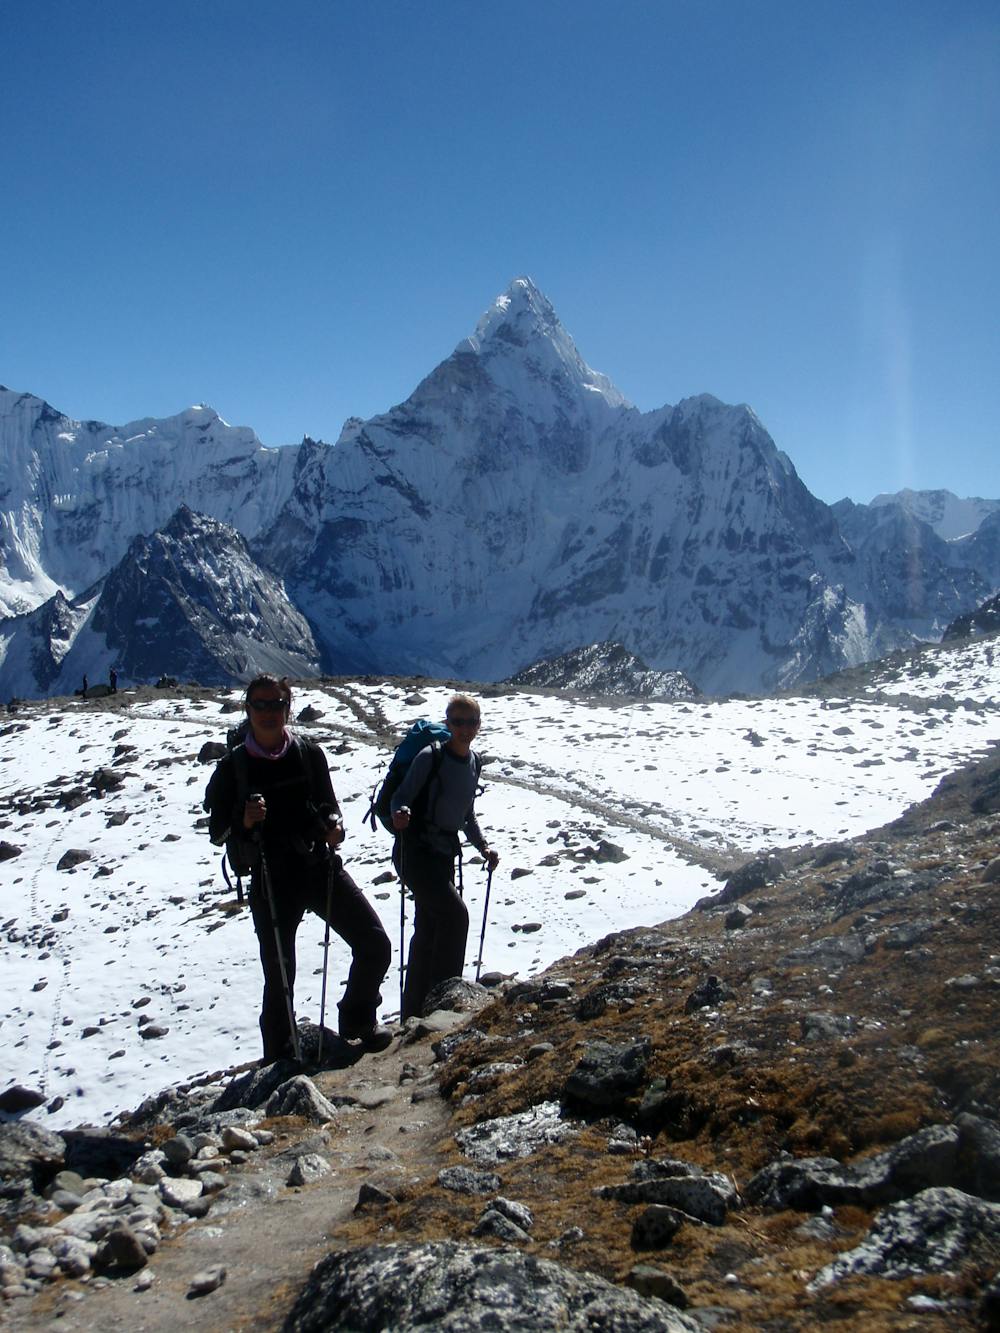 Epic views of Ama Dablam on the descent from the Kongma La